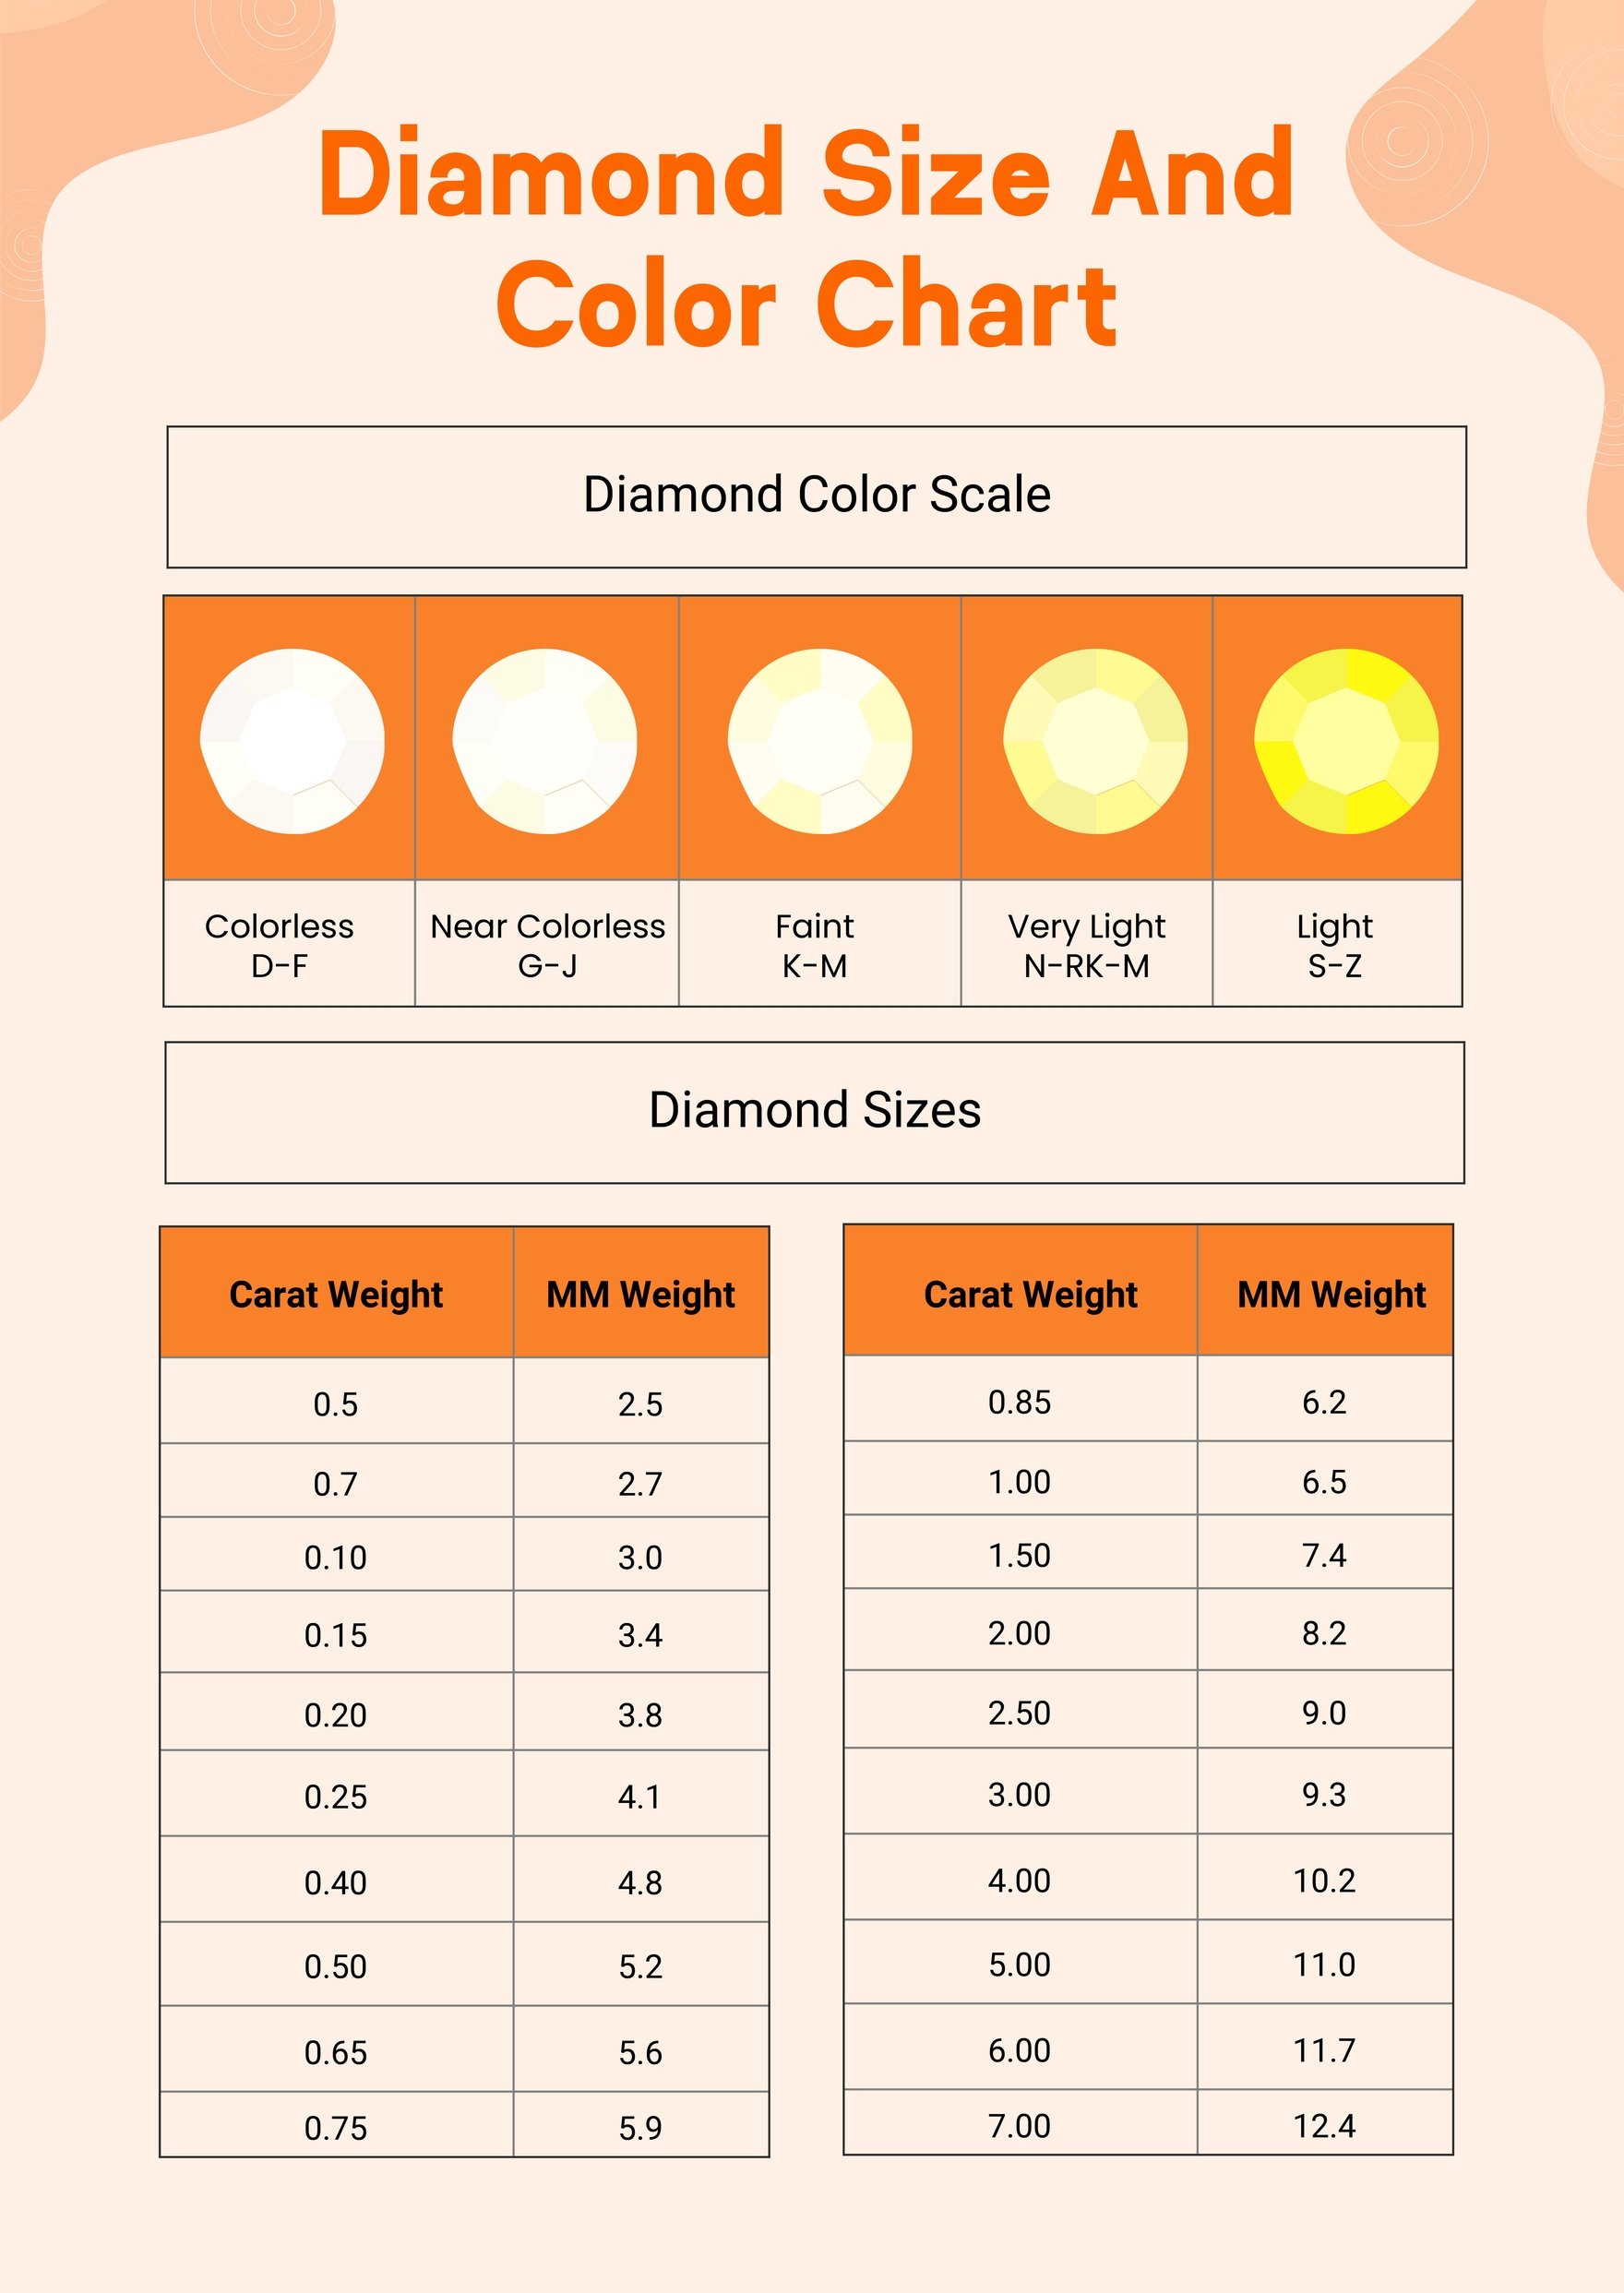 Free Diamond Size And Color Chart in PDF, Illustrator